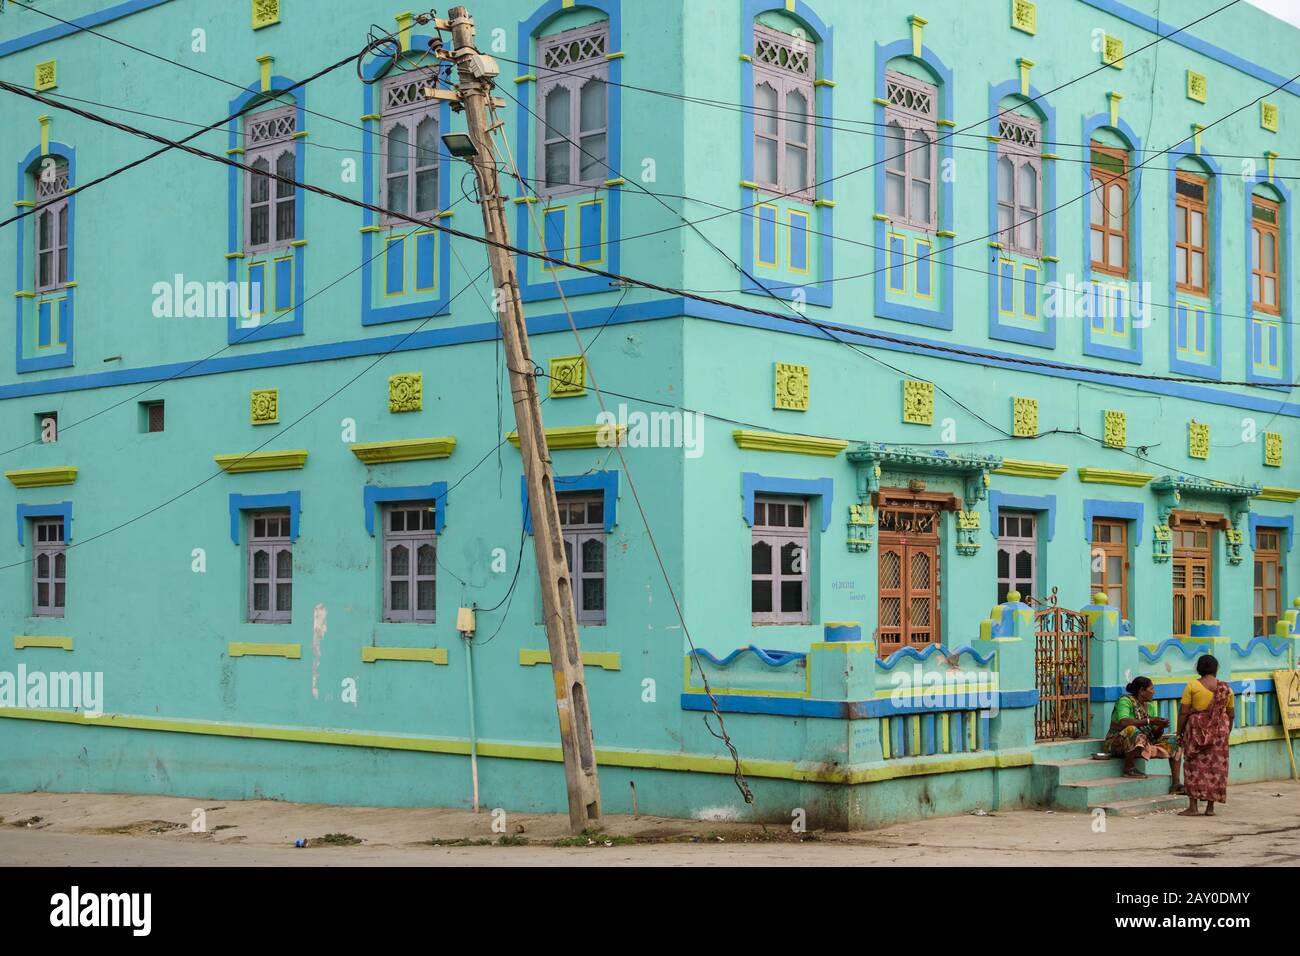 Diu, India - December 2018: An old,  bright turquoise green house with old-fashioned, colorful windows in the streets of the island town of Diu. Stock Photo